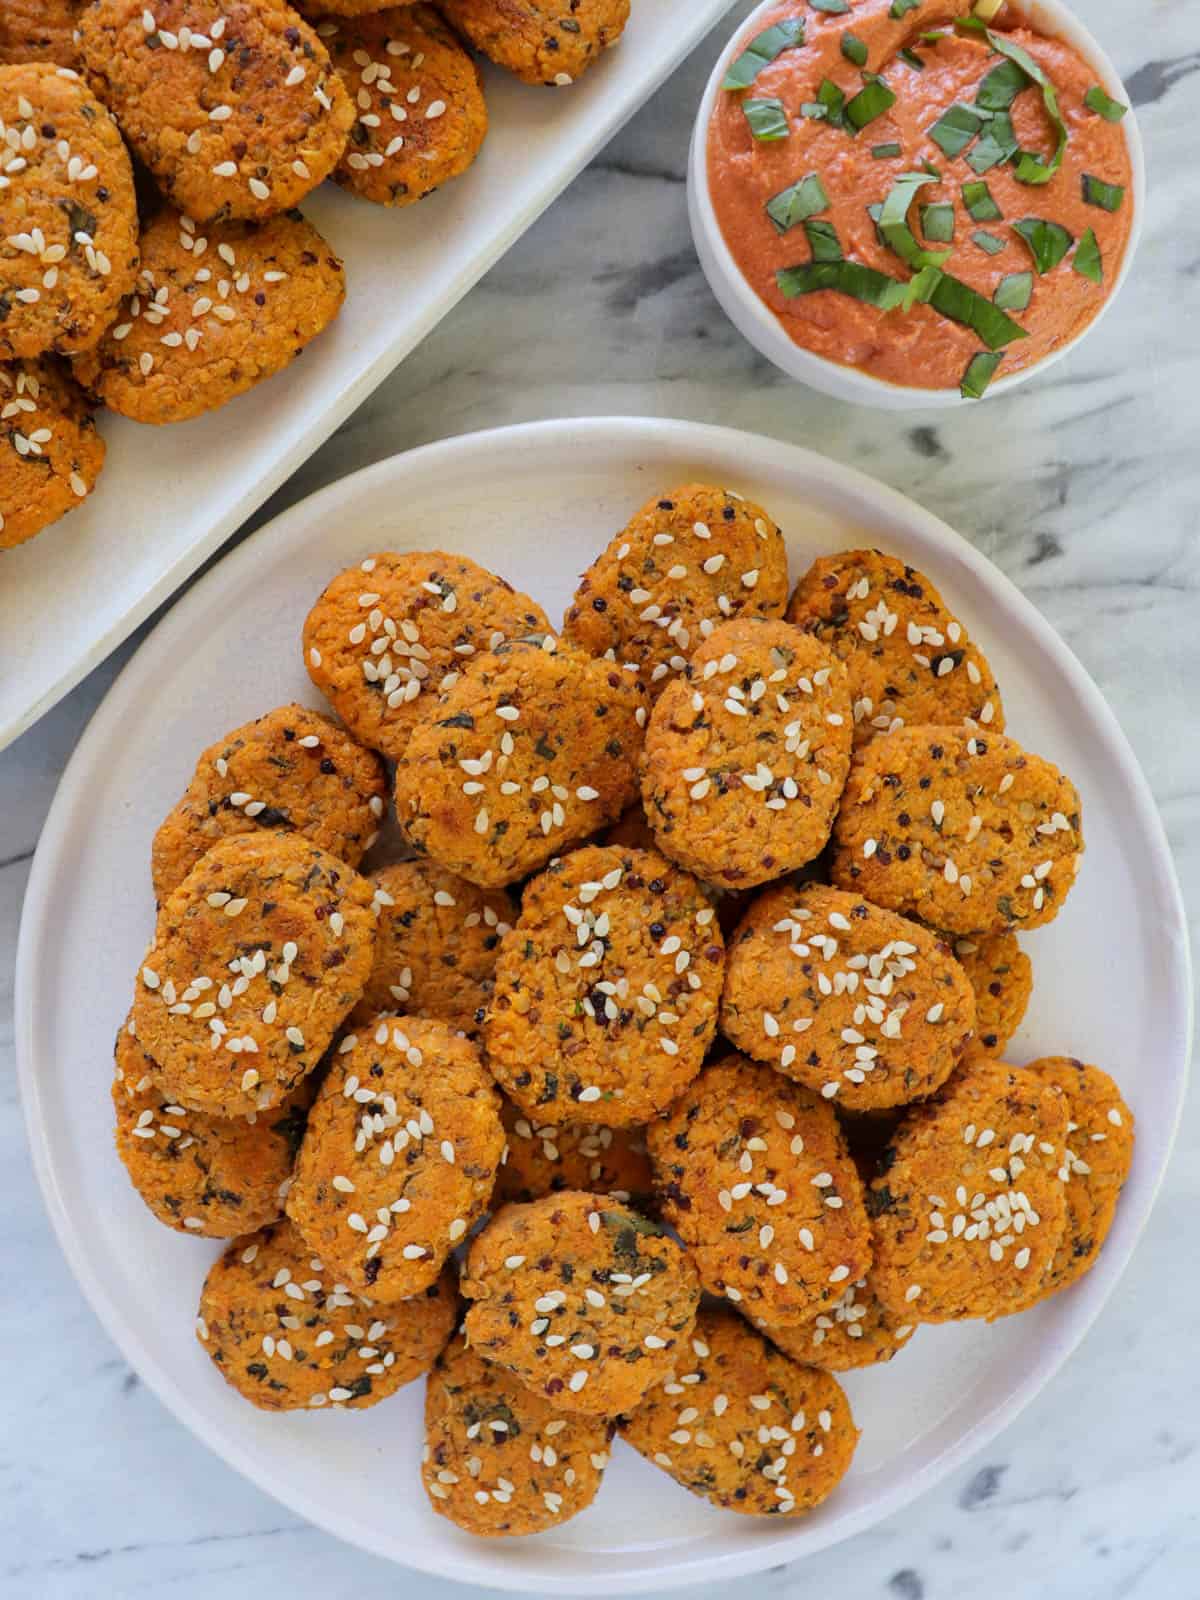 Sweet potato bites on a mini plate with creamy tomato dip on the side.